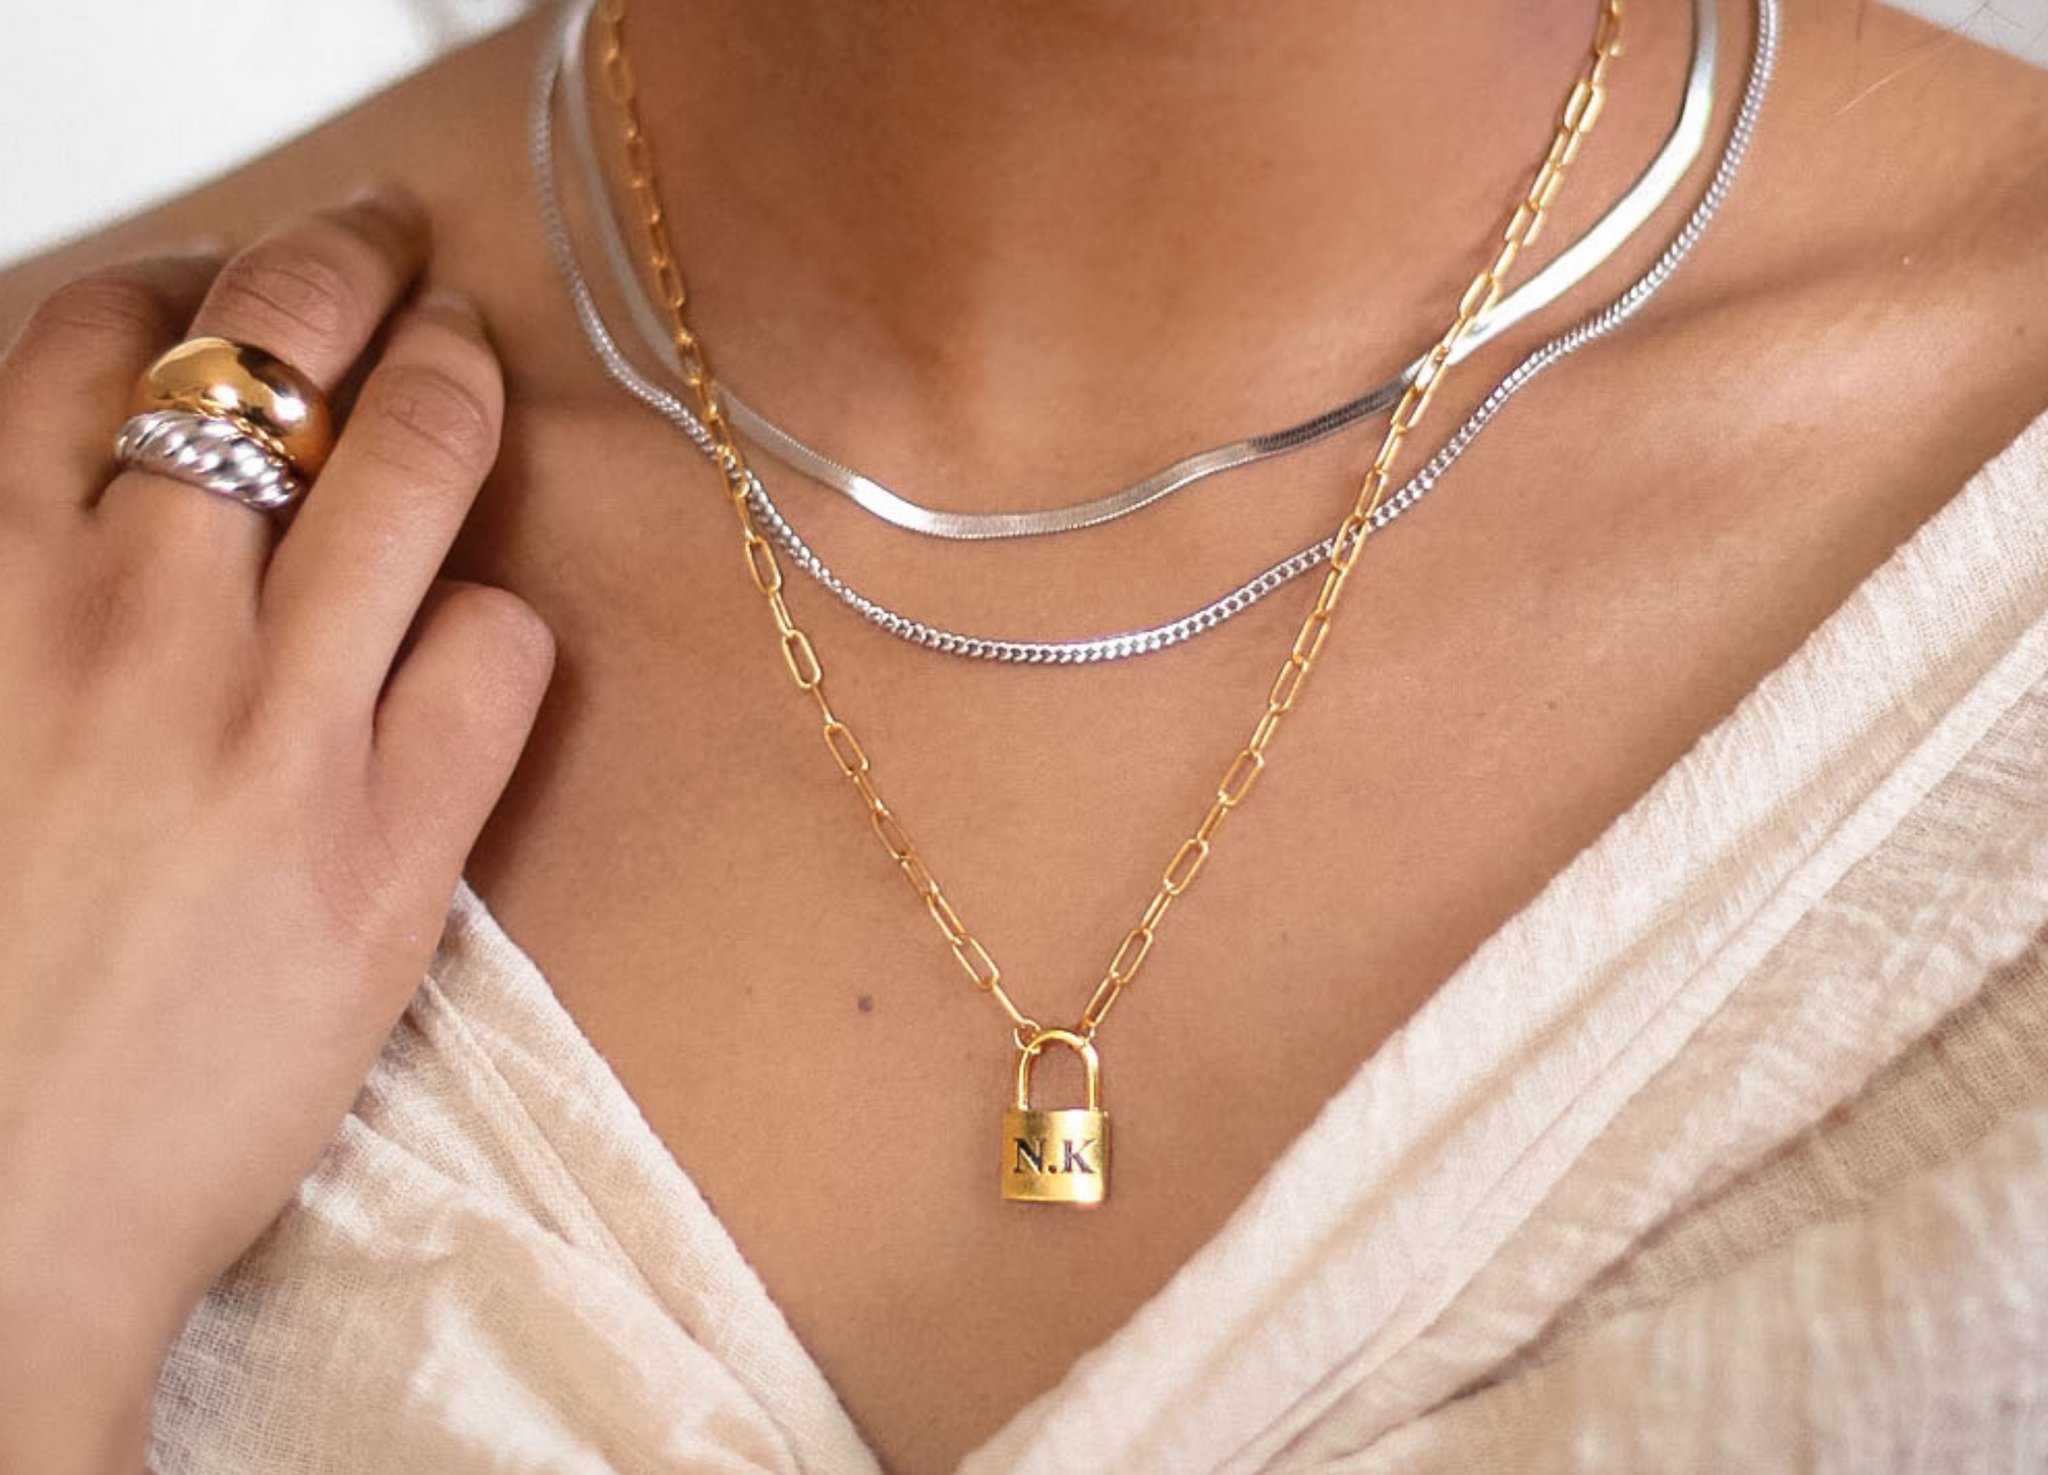 mixing metals, pairing silver with gold, silver and gold jewelry, mixing metals jewelry, silver layering necklace, gold layering necklace, sterling silver, 14k gold, layering necklaces, silver necklace stack, gold necklace stack, jewelry trends 2021, dainty necklace looks, everyday jewelry, jewelry pairing inspiration